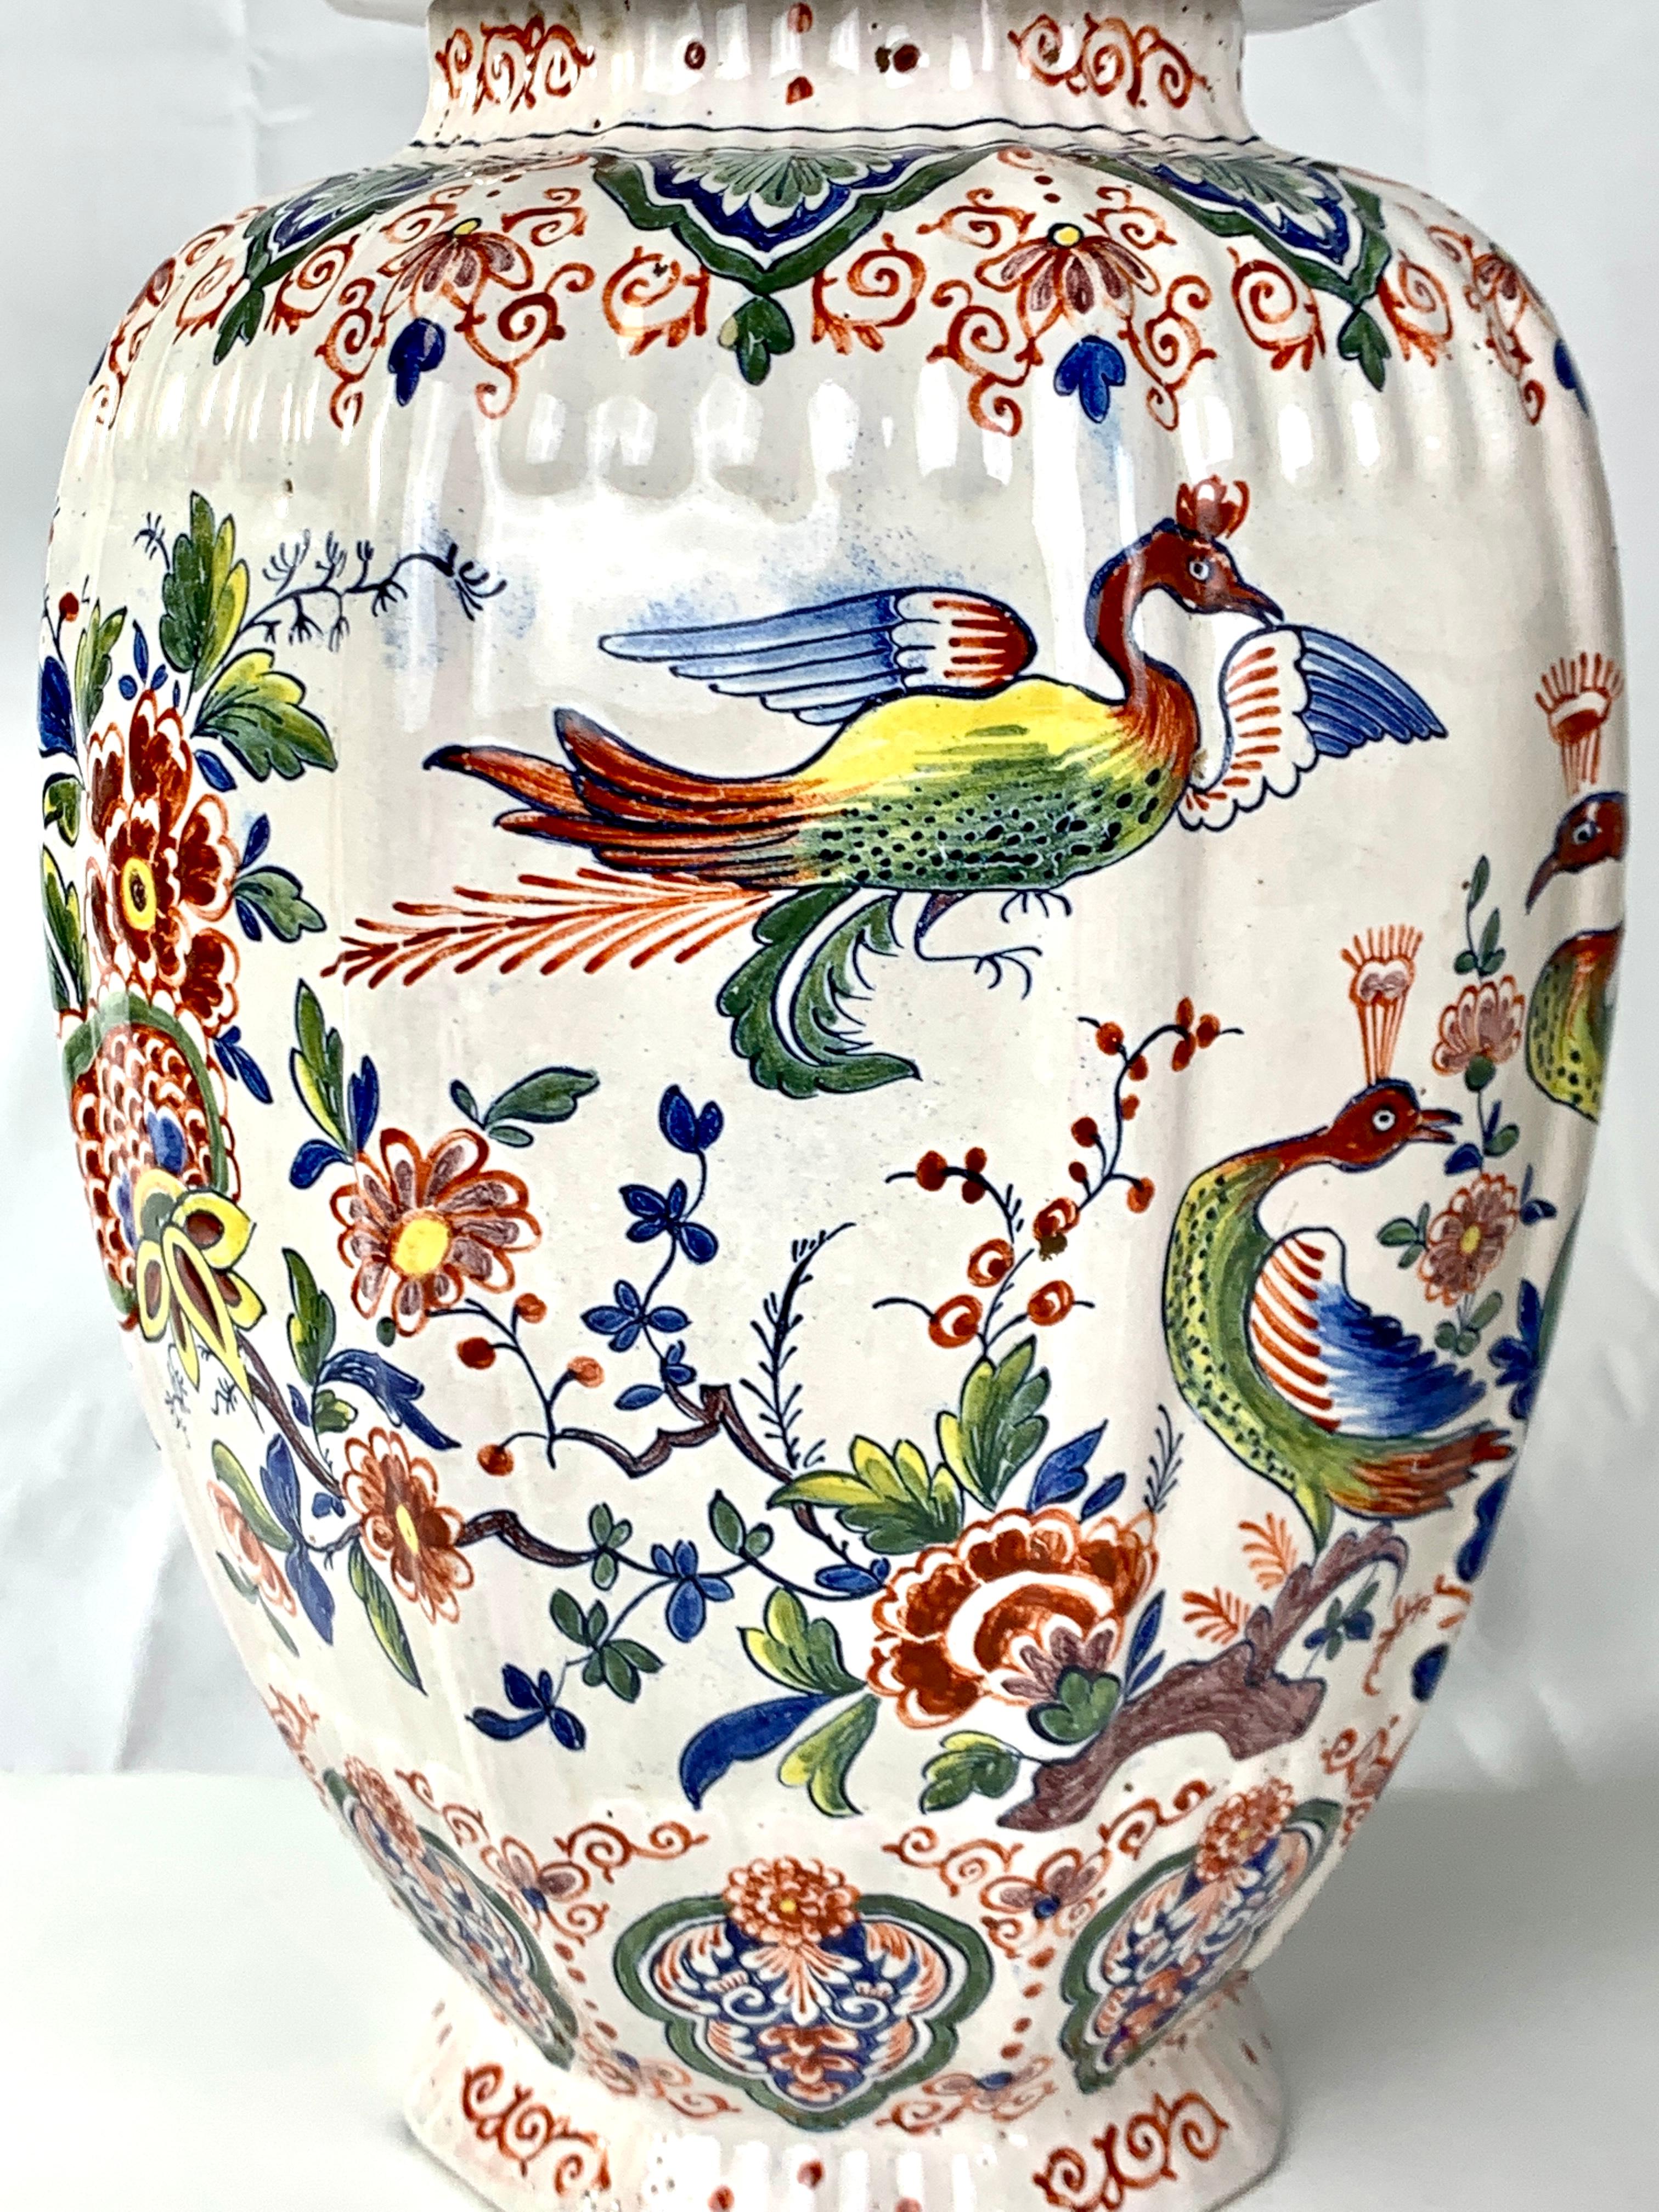 Looking at these jars, we see a lush garden with peacocks and stylized flowers in full bloom. There are five large peacocks!
This pair of Dutch Delft jars is hand-painted in the traditional Delft polychrome colors of iron red, manganese, moss green,